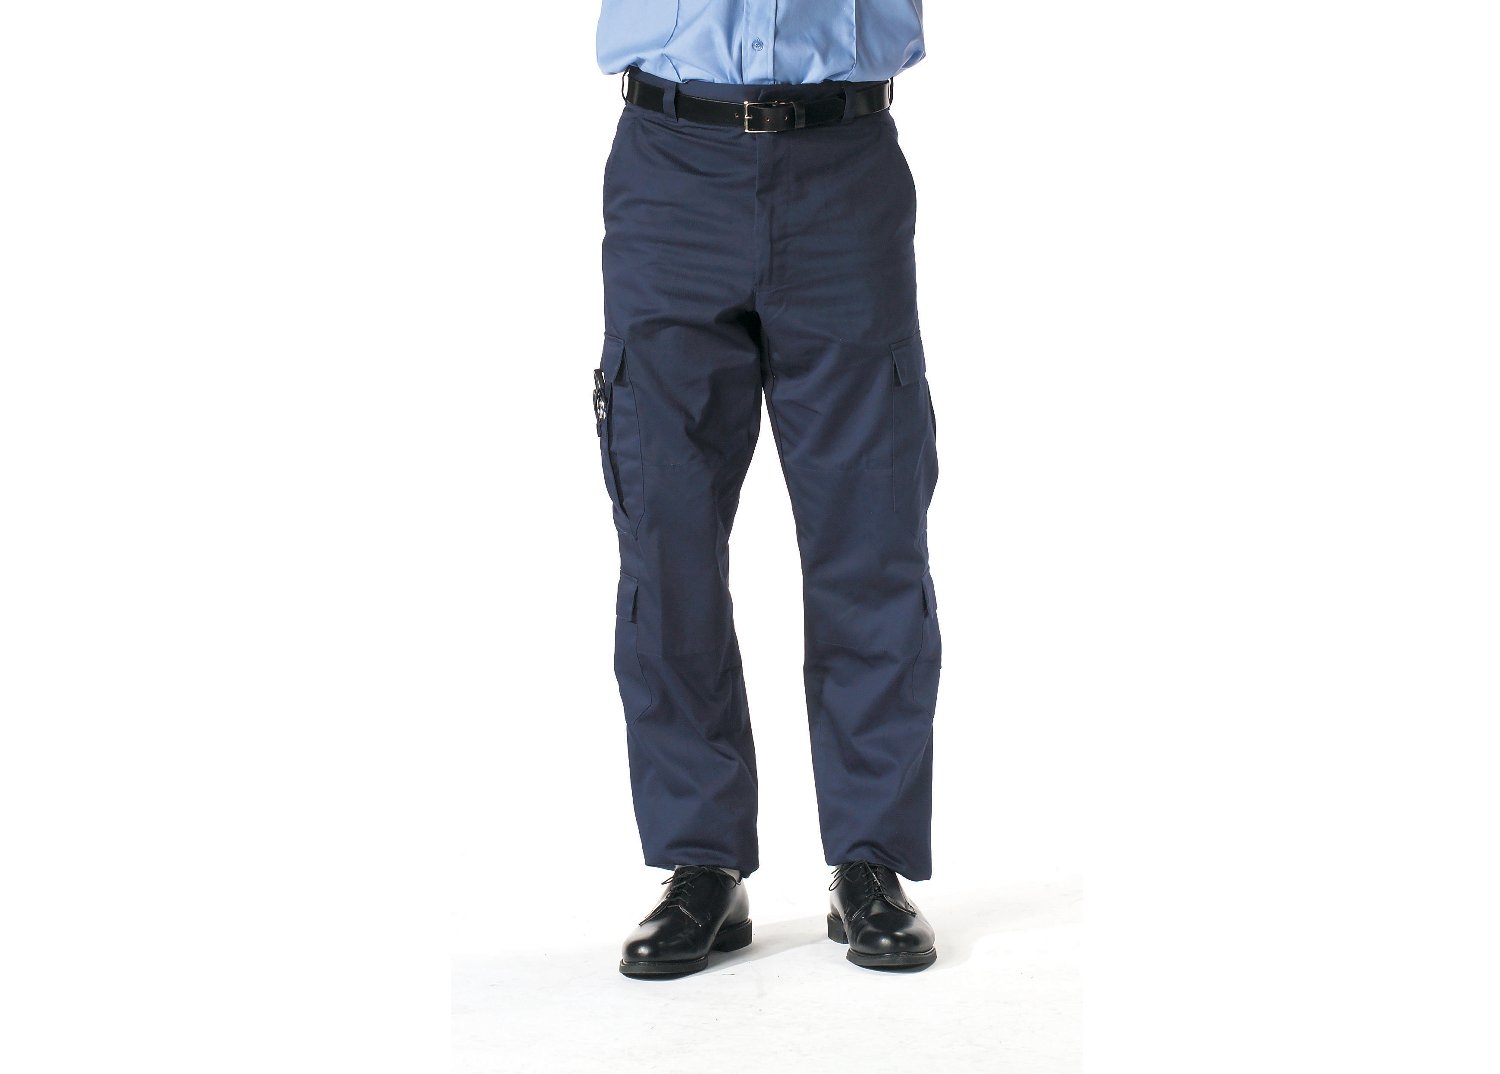 Rothco Deluxe Black EMT Pants